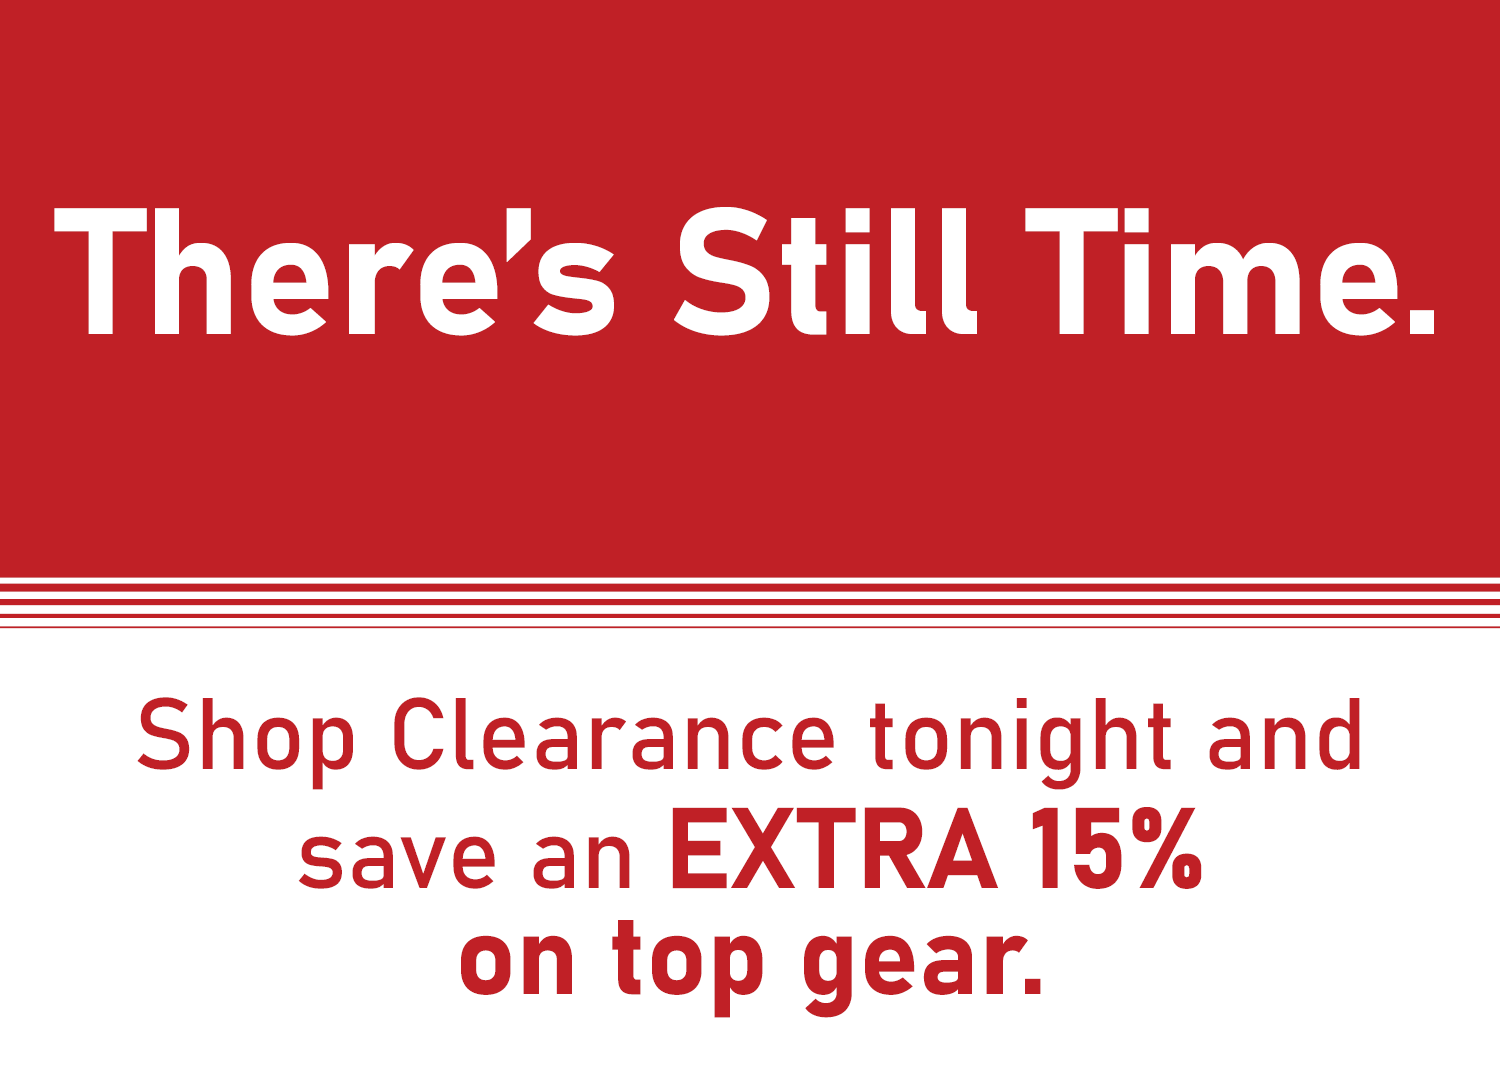 Save an EXTRA 15% on Clearance